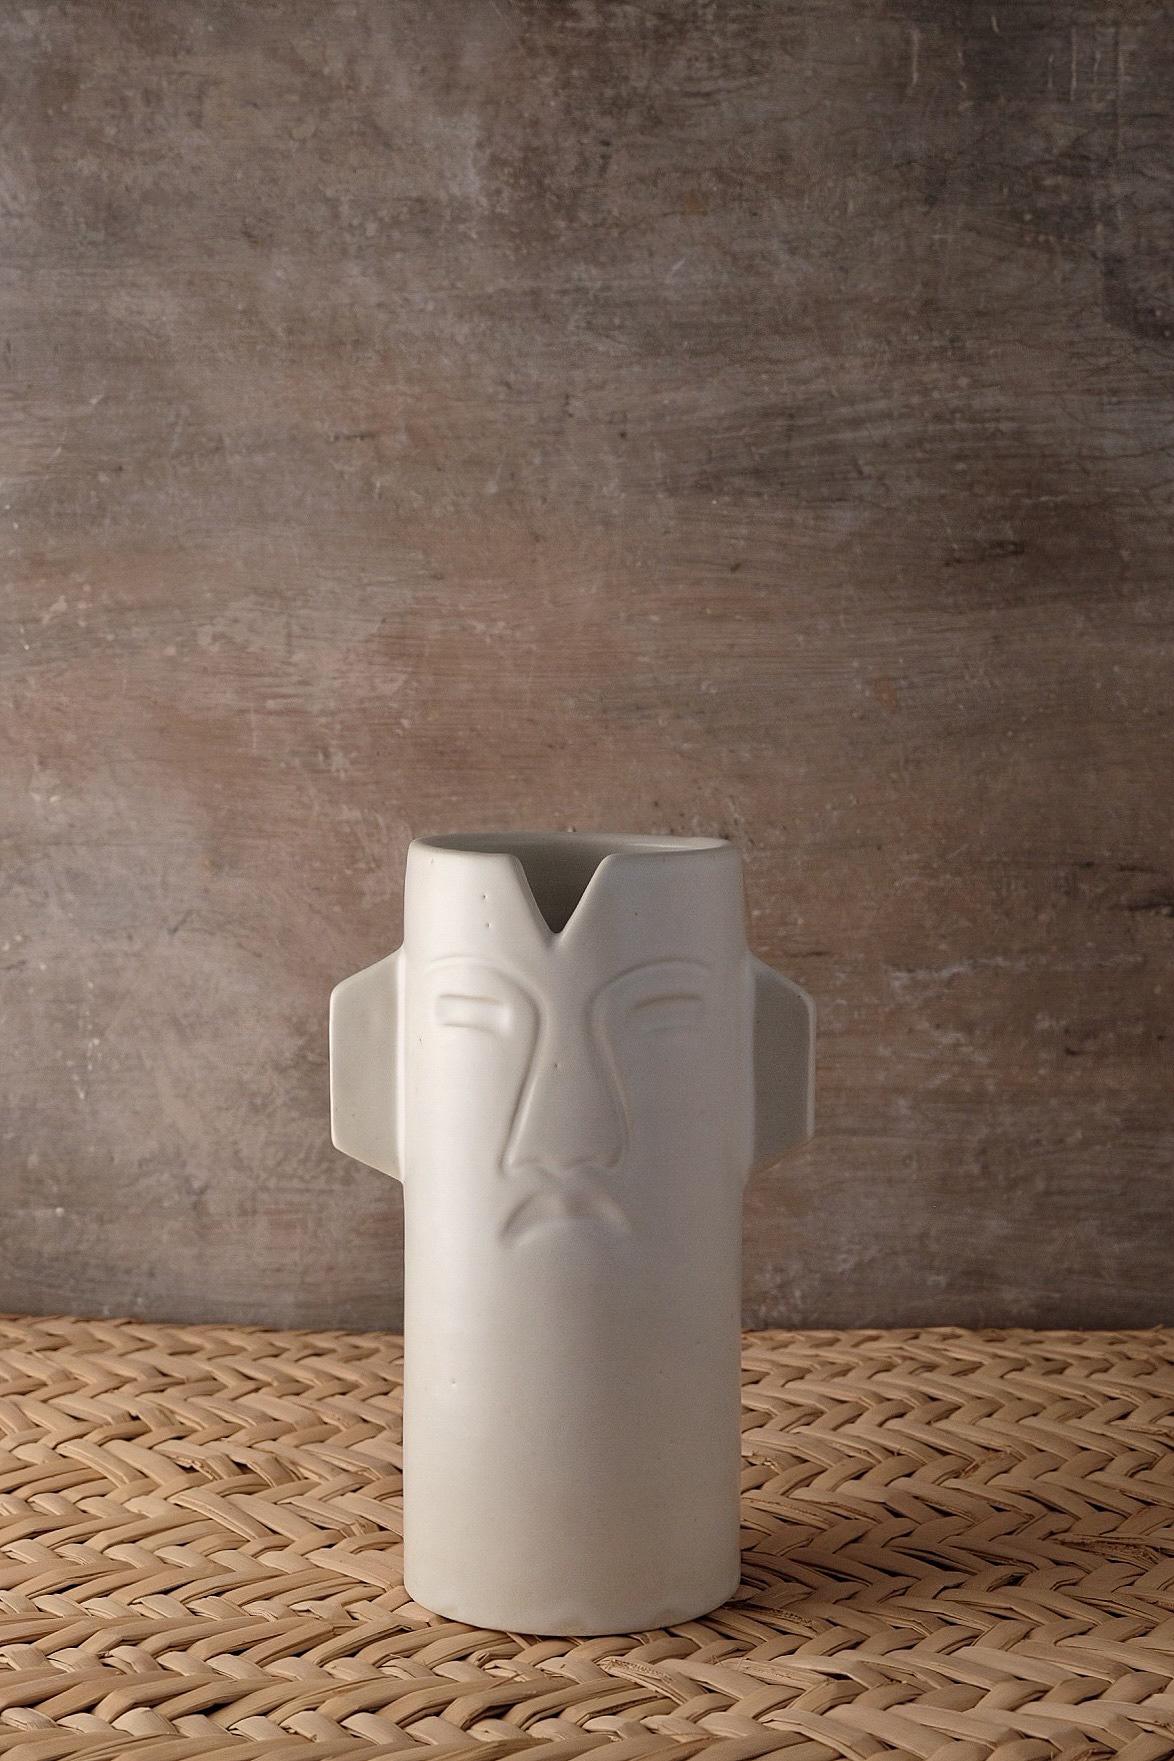 Chac ceramic vase by Onora
Dimensions: D 12 x 25 cm
Materials: Ceramic
Available in black, white and sand. 

This ceramic vase refers pre-hispanic ceremonial masks. Molded by artisans from the State of Mexico.

This collection reinterprets